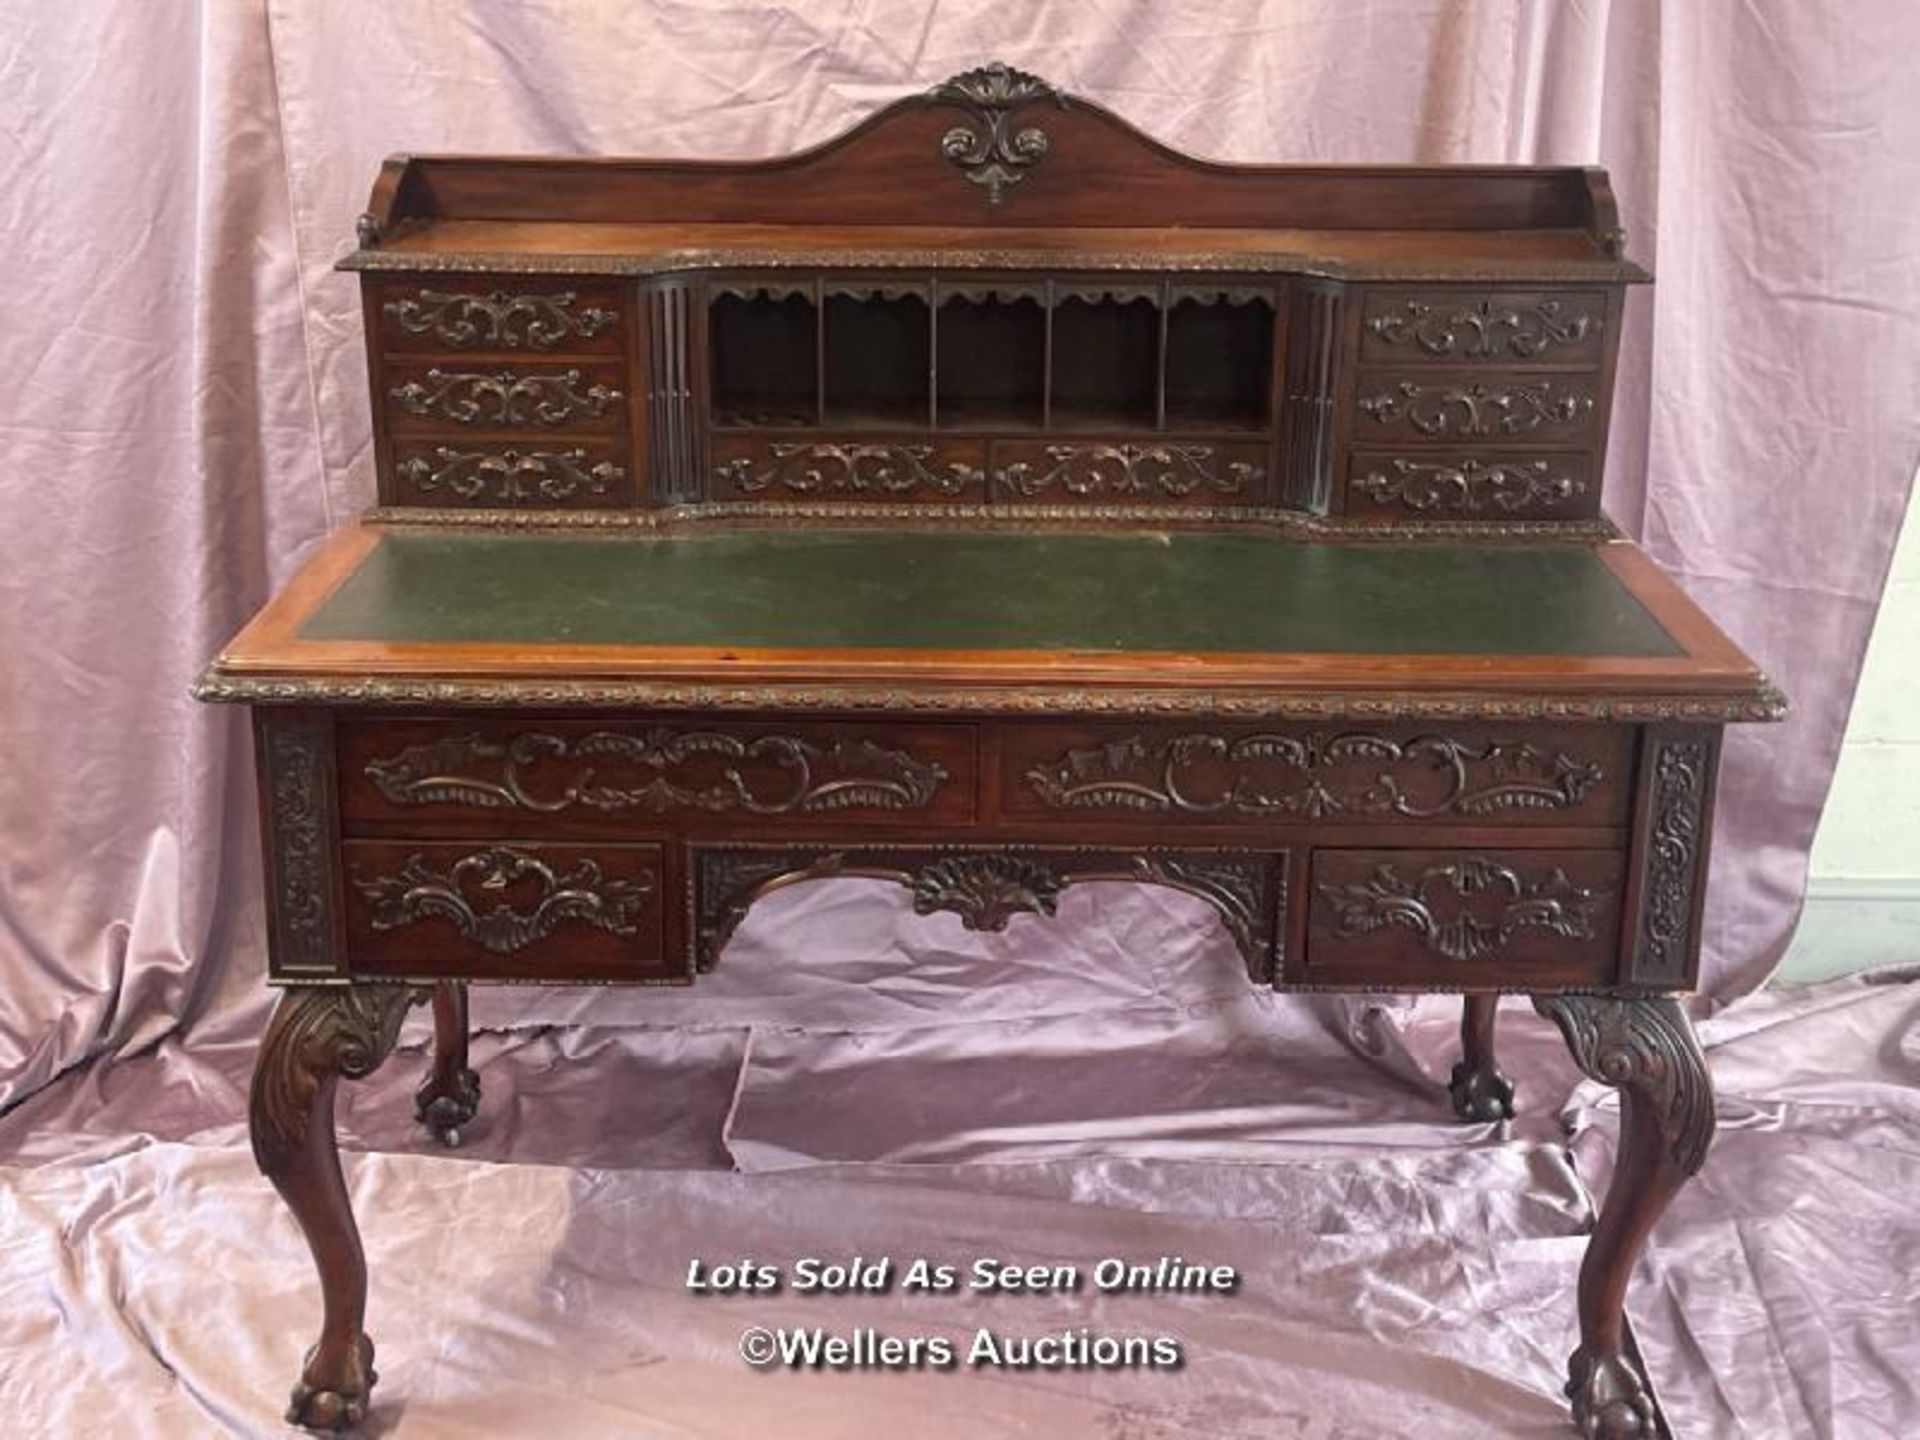 CIRCA 1900, GEOGIAN STYLE HIGHLY DECORATIVE AND CARVED MAHOGANY LINED WRITING DESK WITH LEATHER - Image 11 of 11